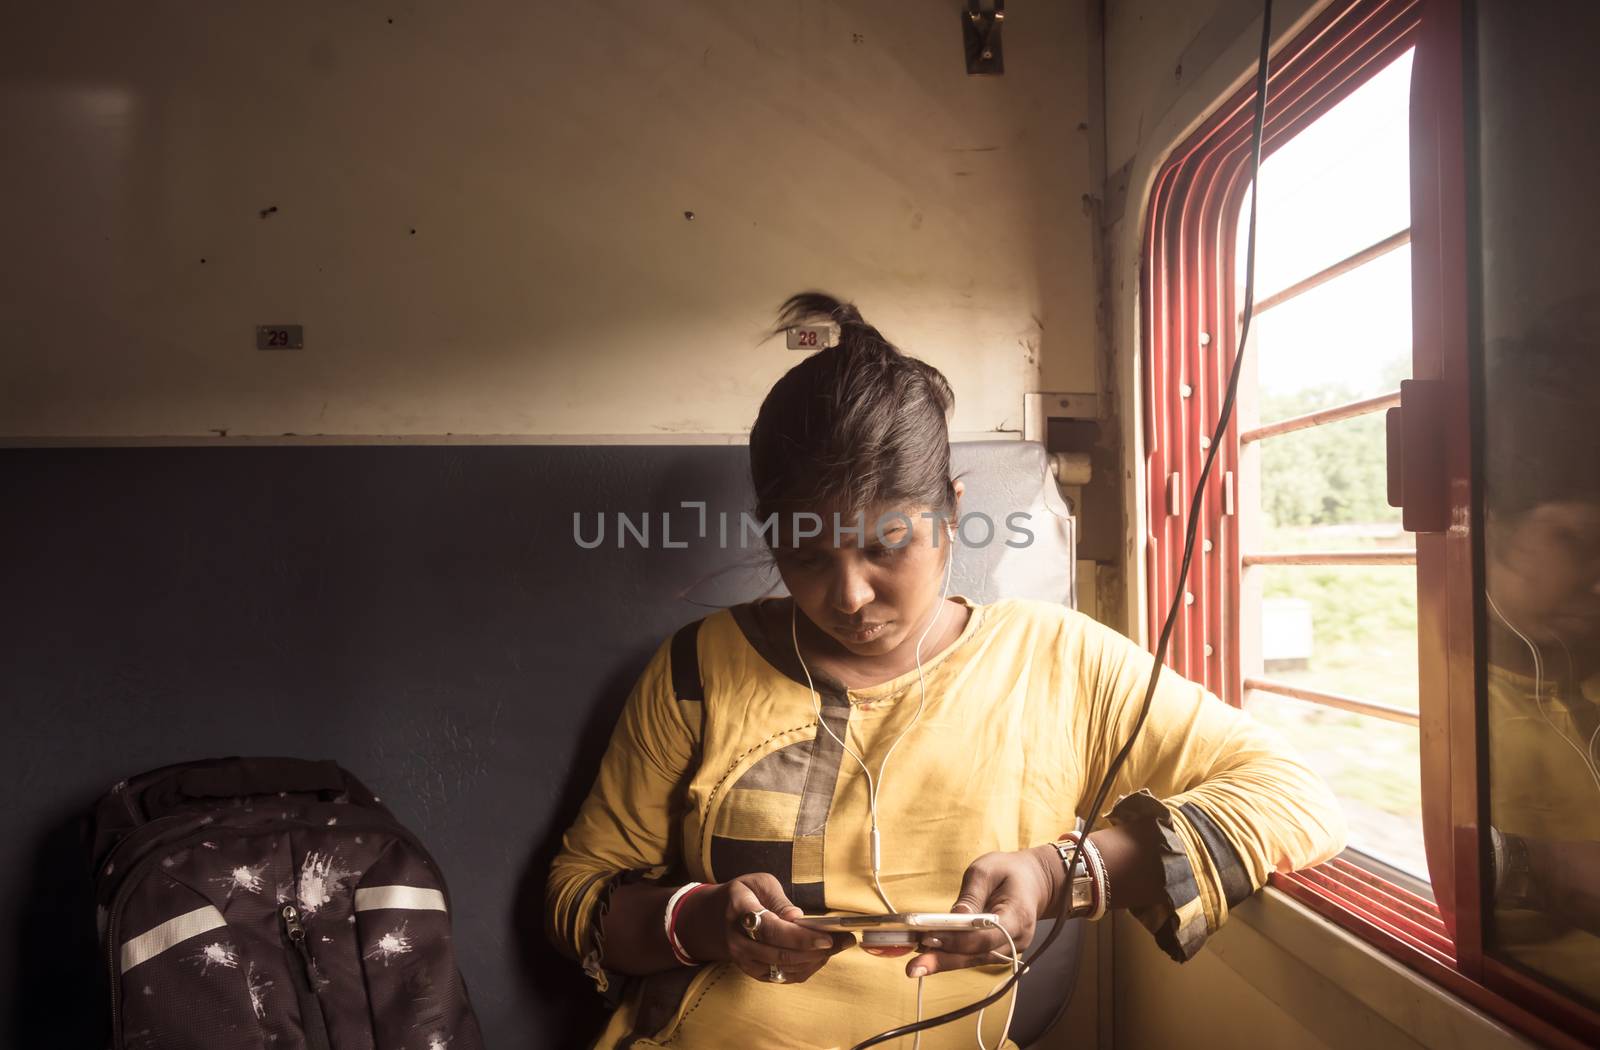 Woman using mobile phone while traveling solo in passenger train. Traveler enjoying Modern technology on the move in everyday life and travel. Close up portrait - Young Adult Lady - Indian ethnicity.